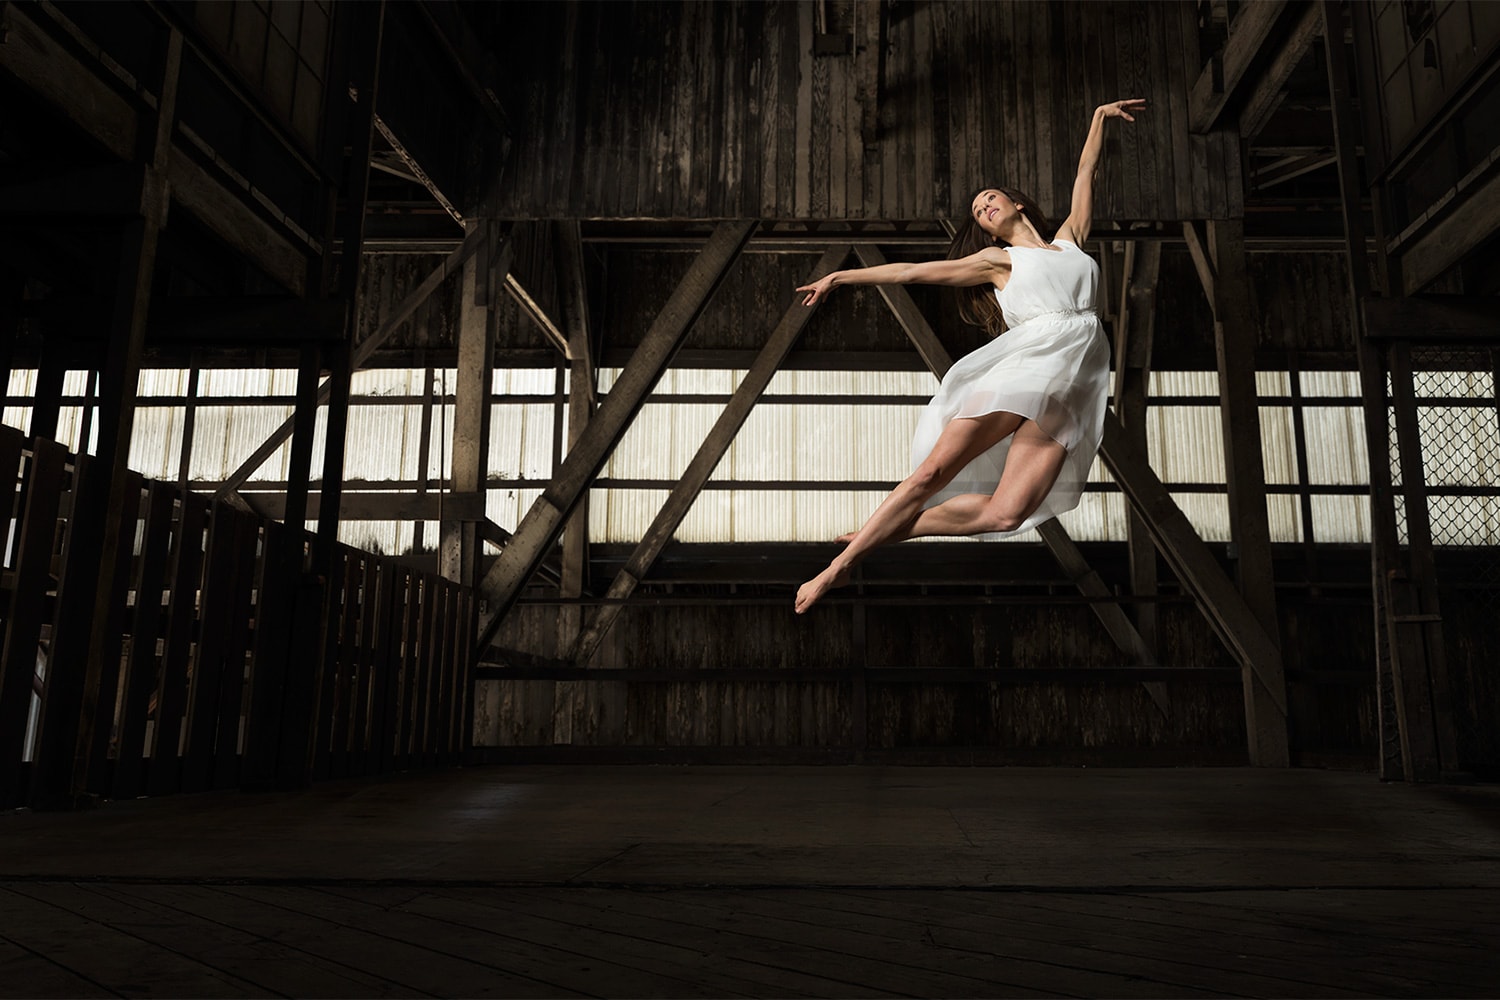 Female-Ballet-Ballerina-dancing-jumping-white-outfit-wood-warehouse-Rod-McLean